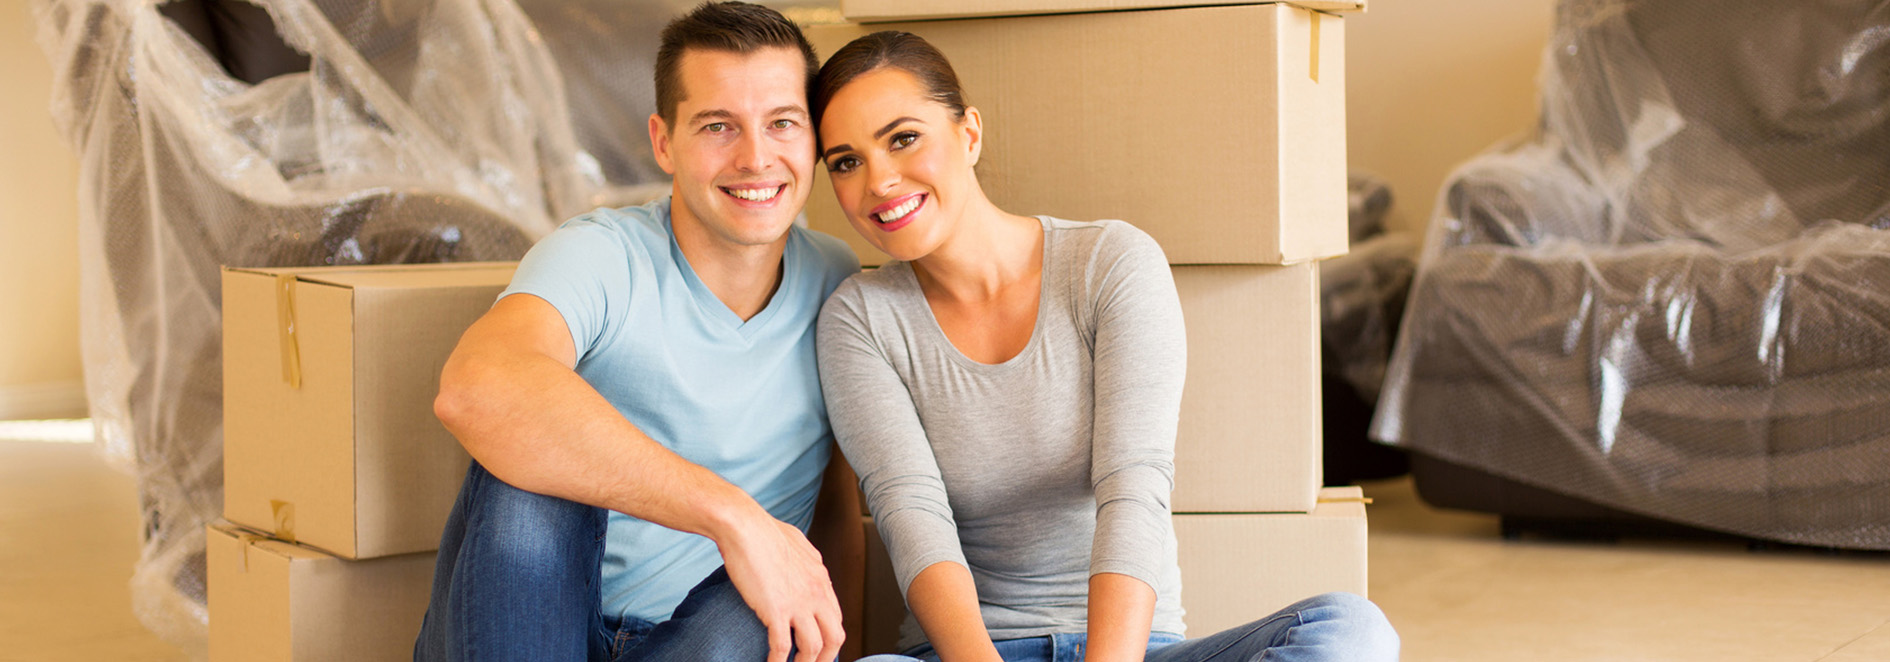 abbey-removals-removalists-gawler-barossa-03